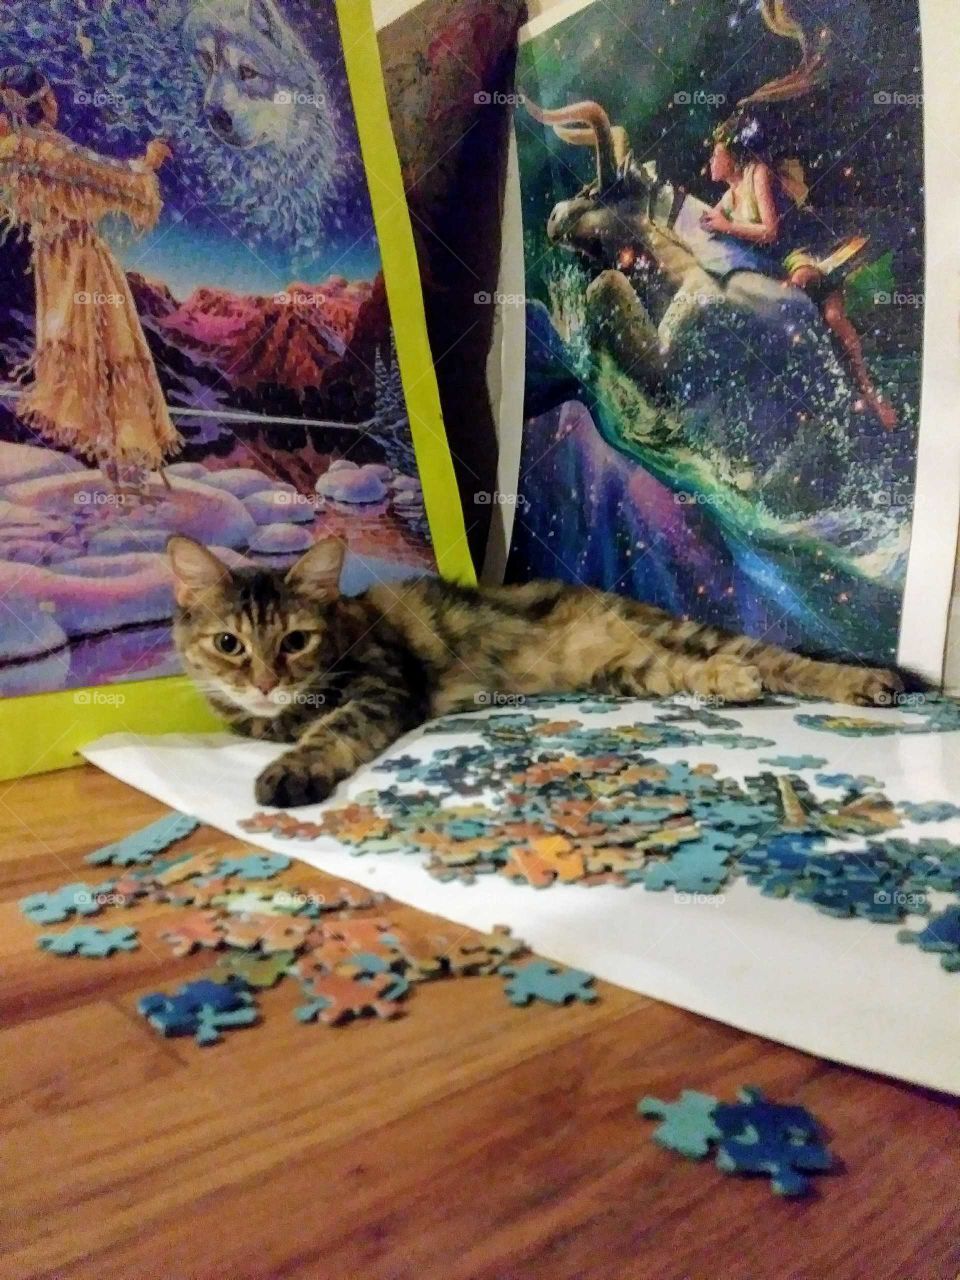 She's helping me with the puzzle